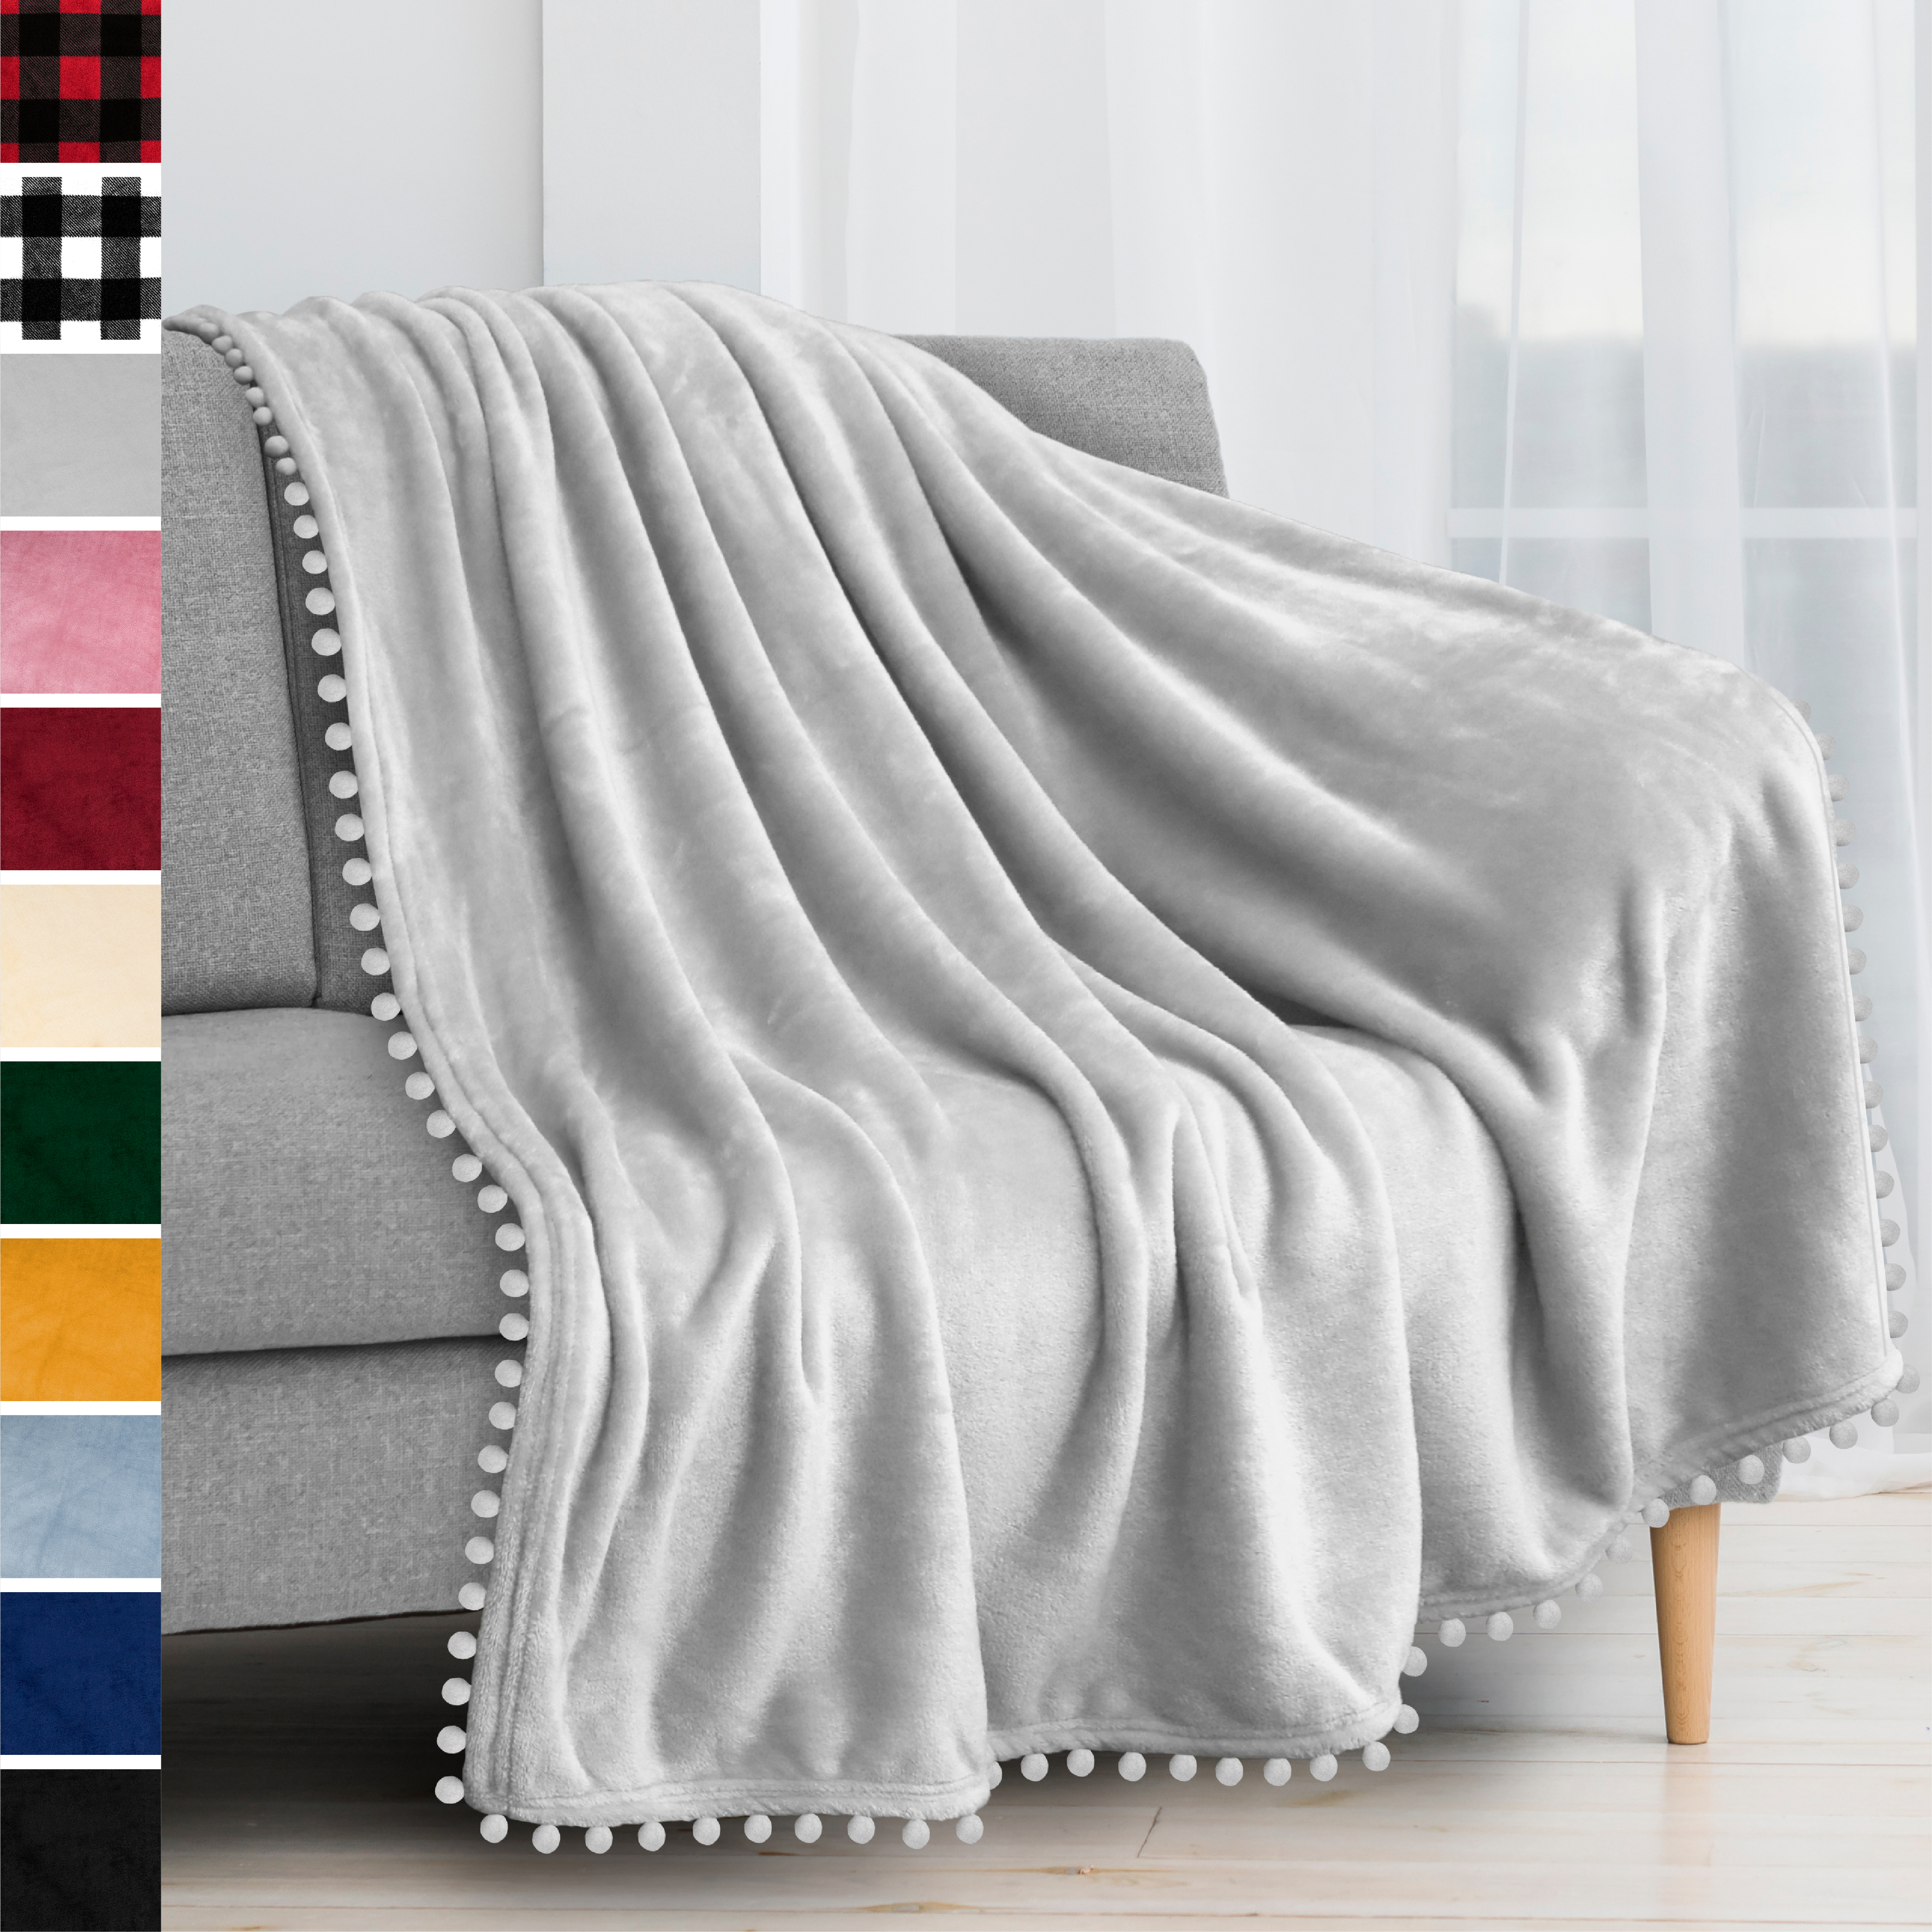 thumbnail 62 - Fleece Throw Blanket with Pom Pom Fringe Super Soft Lightweight Bed Couch Home